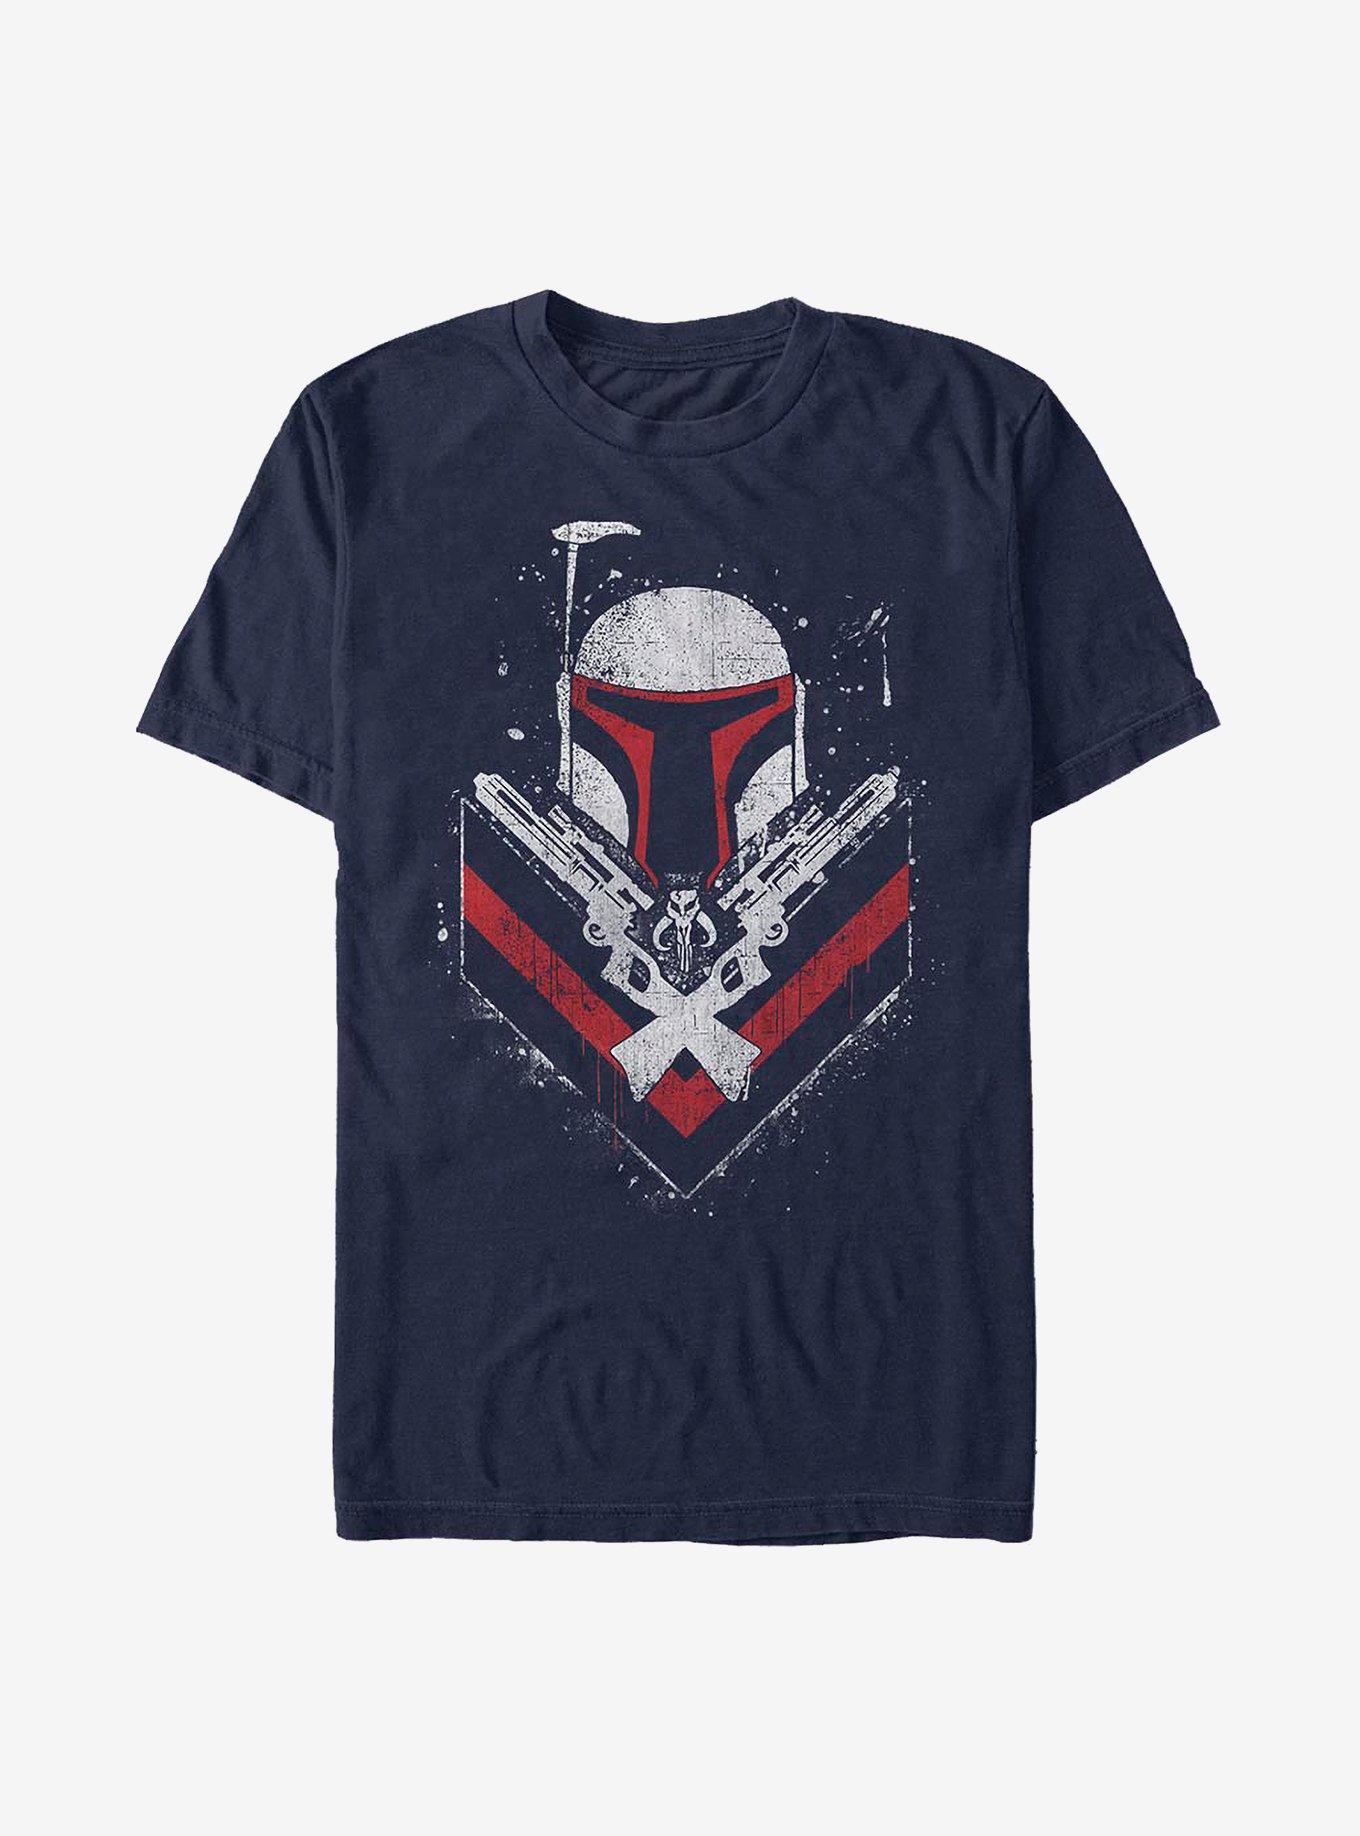 Star Wars Only Promises T-Shirt, NAVY, hi-res